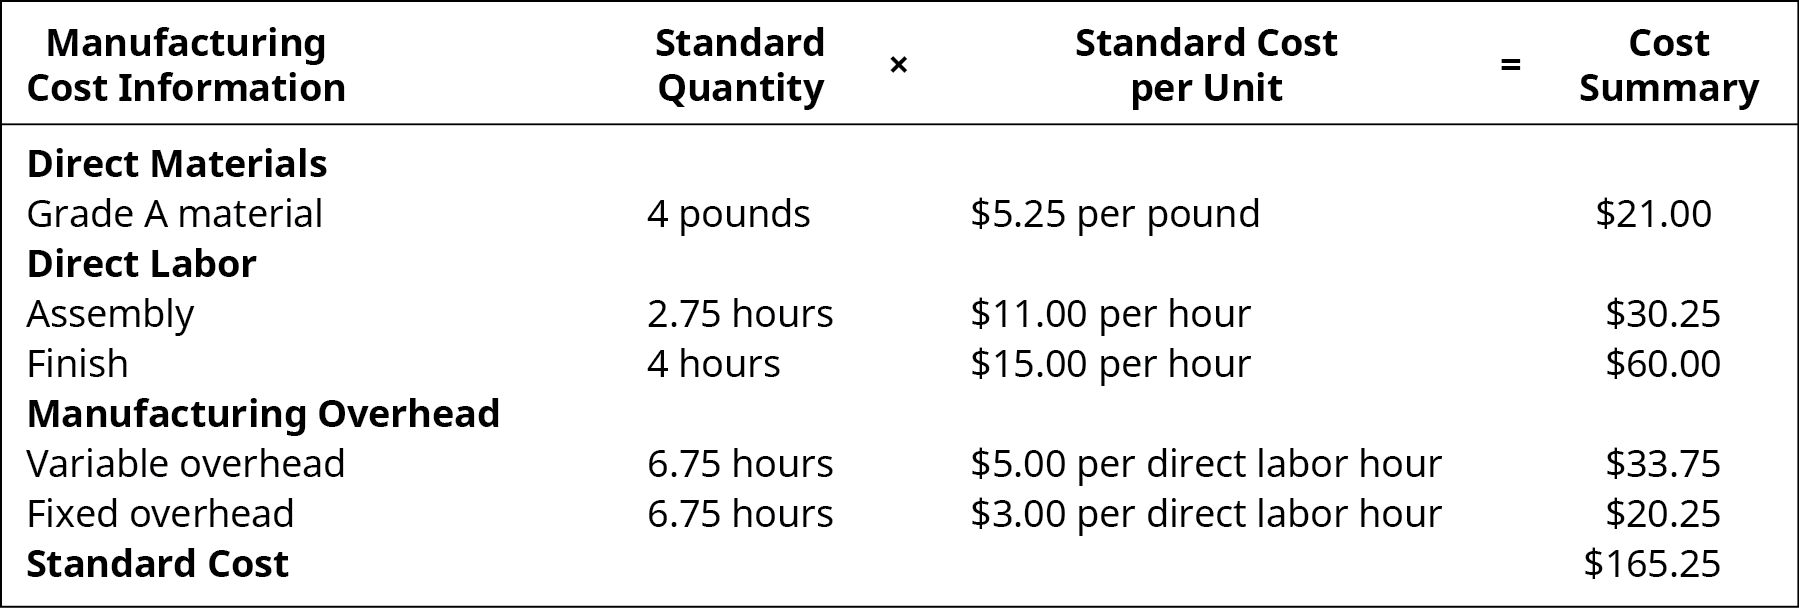 Manufacturing Cost Information: Standard Quantity times Standard Cost per Unit equals Cost Summary. Direct Materials Grade A material, 4 pounds, $5.25 per pound, $21.00. Direct Labor Assembly, 2.75 hours, $11.00 per hour, $30.25. Direct Labor Finish, 4 hours, $15.00 per hour, $60.00. Manufacturing Overhead Variable, 6.75 hours, $5.00 per direct labor hour, $33.75. Manufacturing Overhead Fixed, 6.75 hours, $3.00 per direct labor hour, $20.25. Standard Cost, -, -, $165.25.